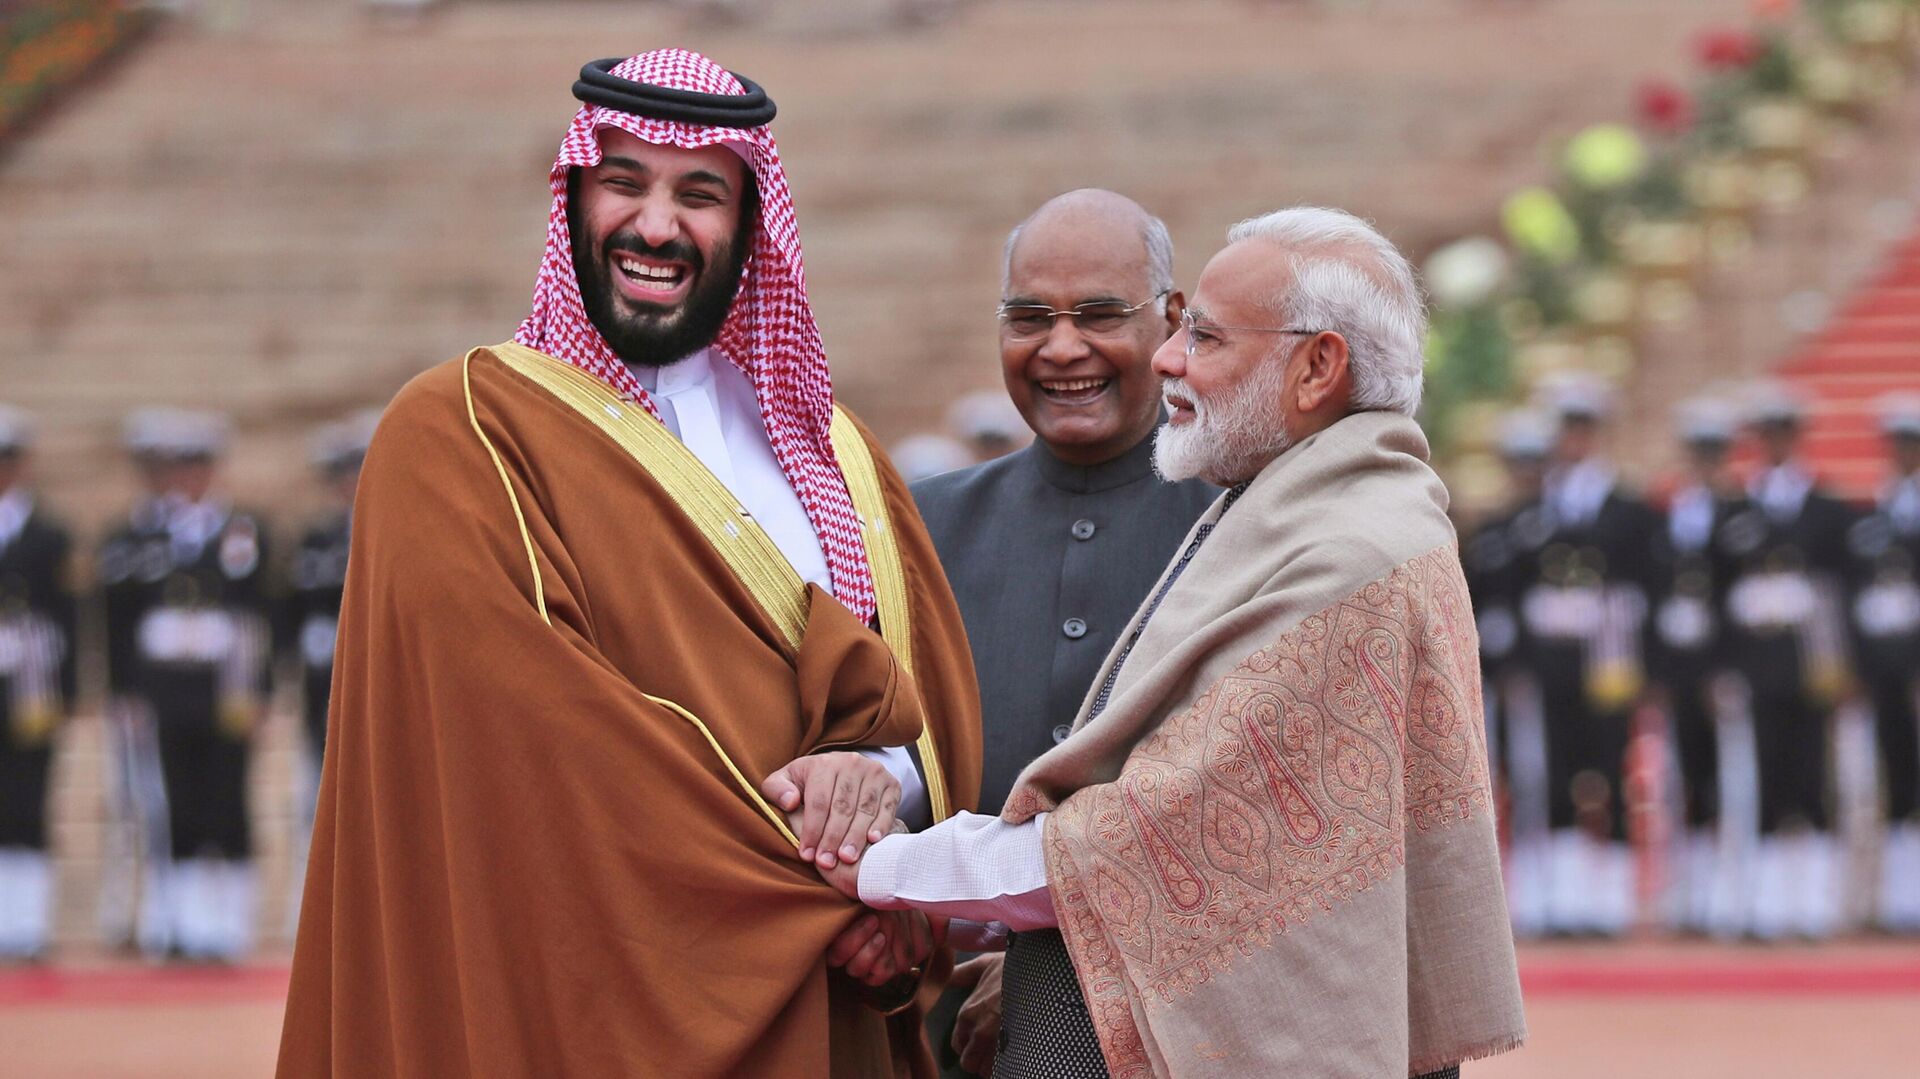 FILE - In this Feb. 20, 2019 file photo, Saudi Arabia's Crown Prince Mohammed bin Salman shakes hand with Indian Prime Minister Narendra Modi during a ceremonial welcome in New Delhi, India - Sputnik International, 1920, 20.09.2022